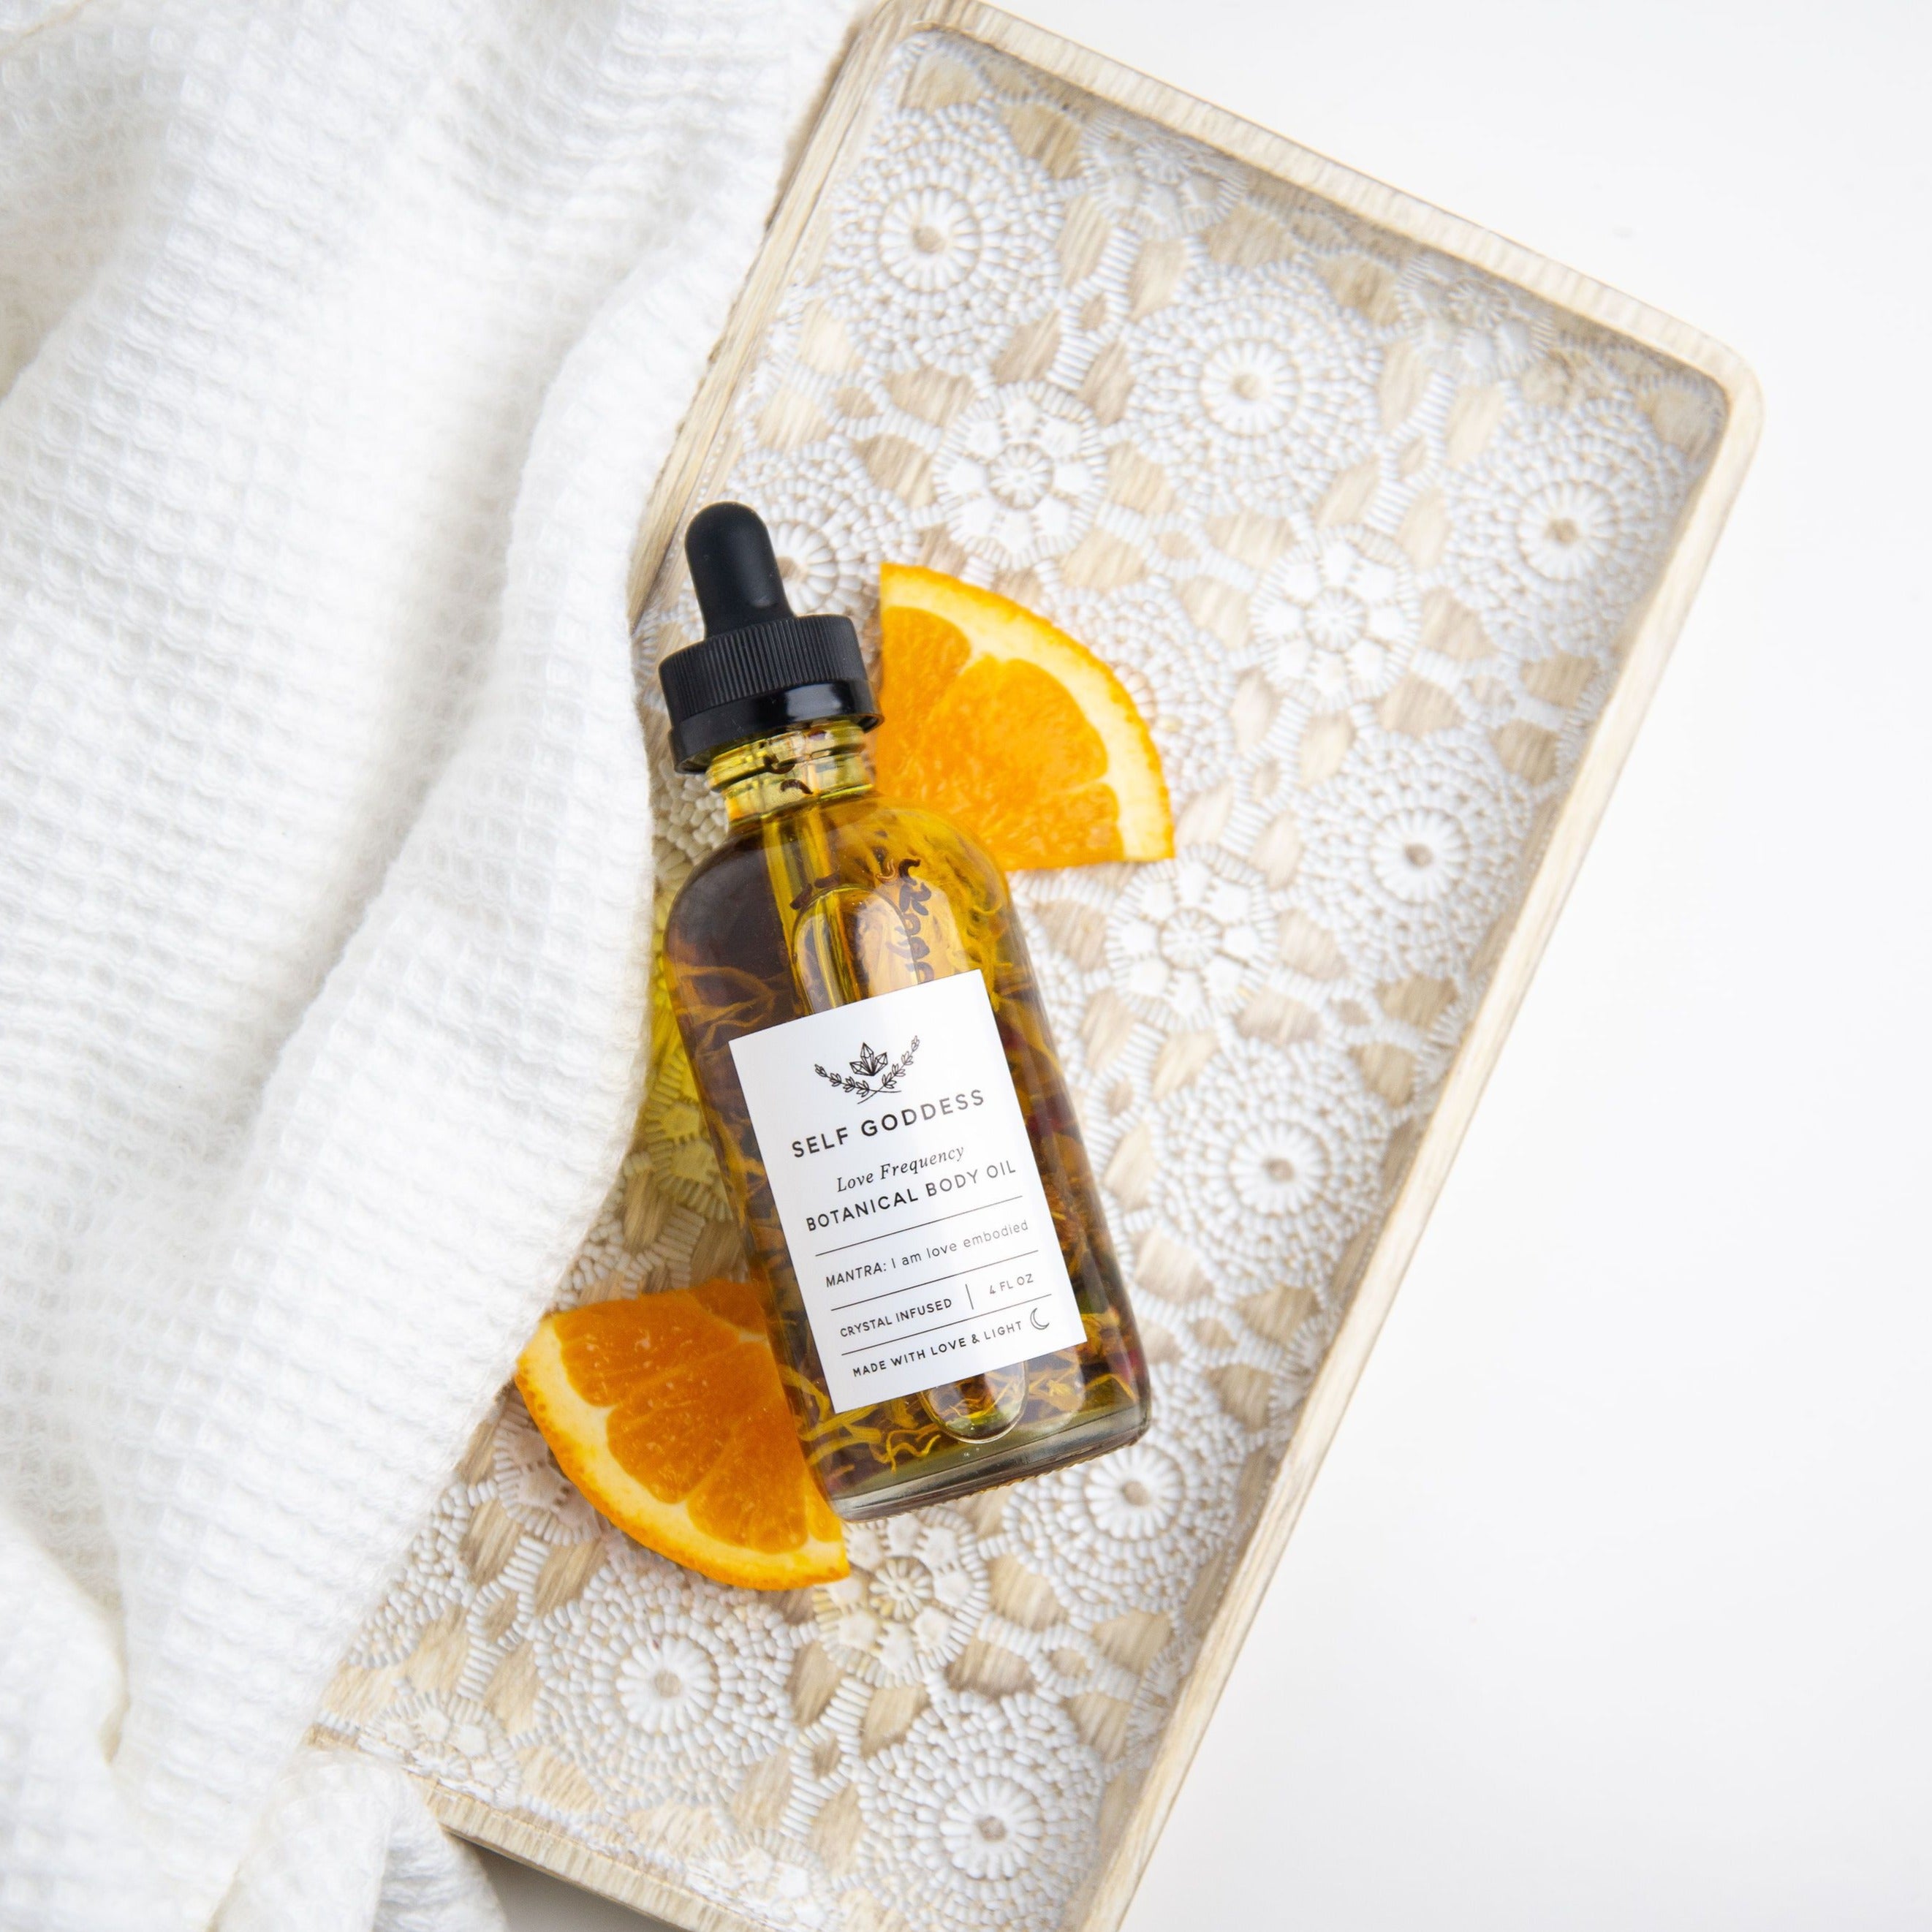 Love Frequency Botanical Body Oil